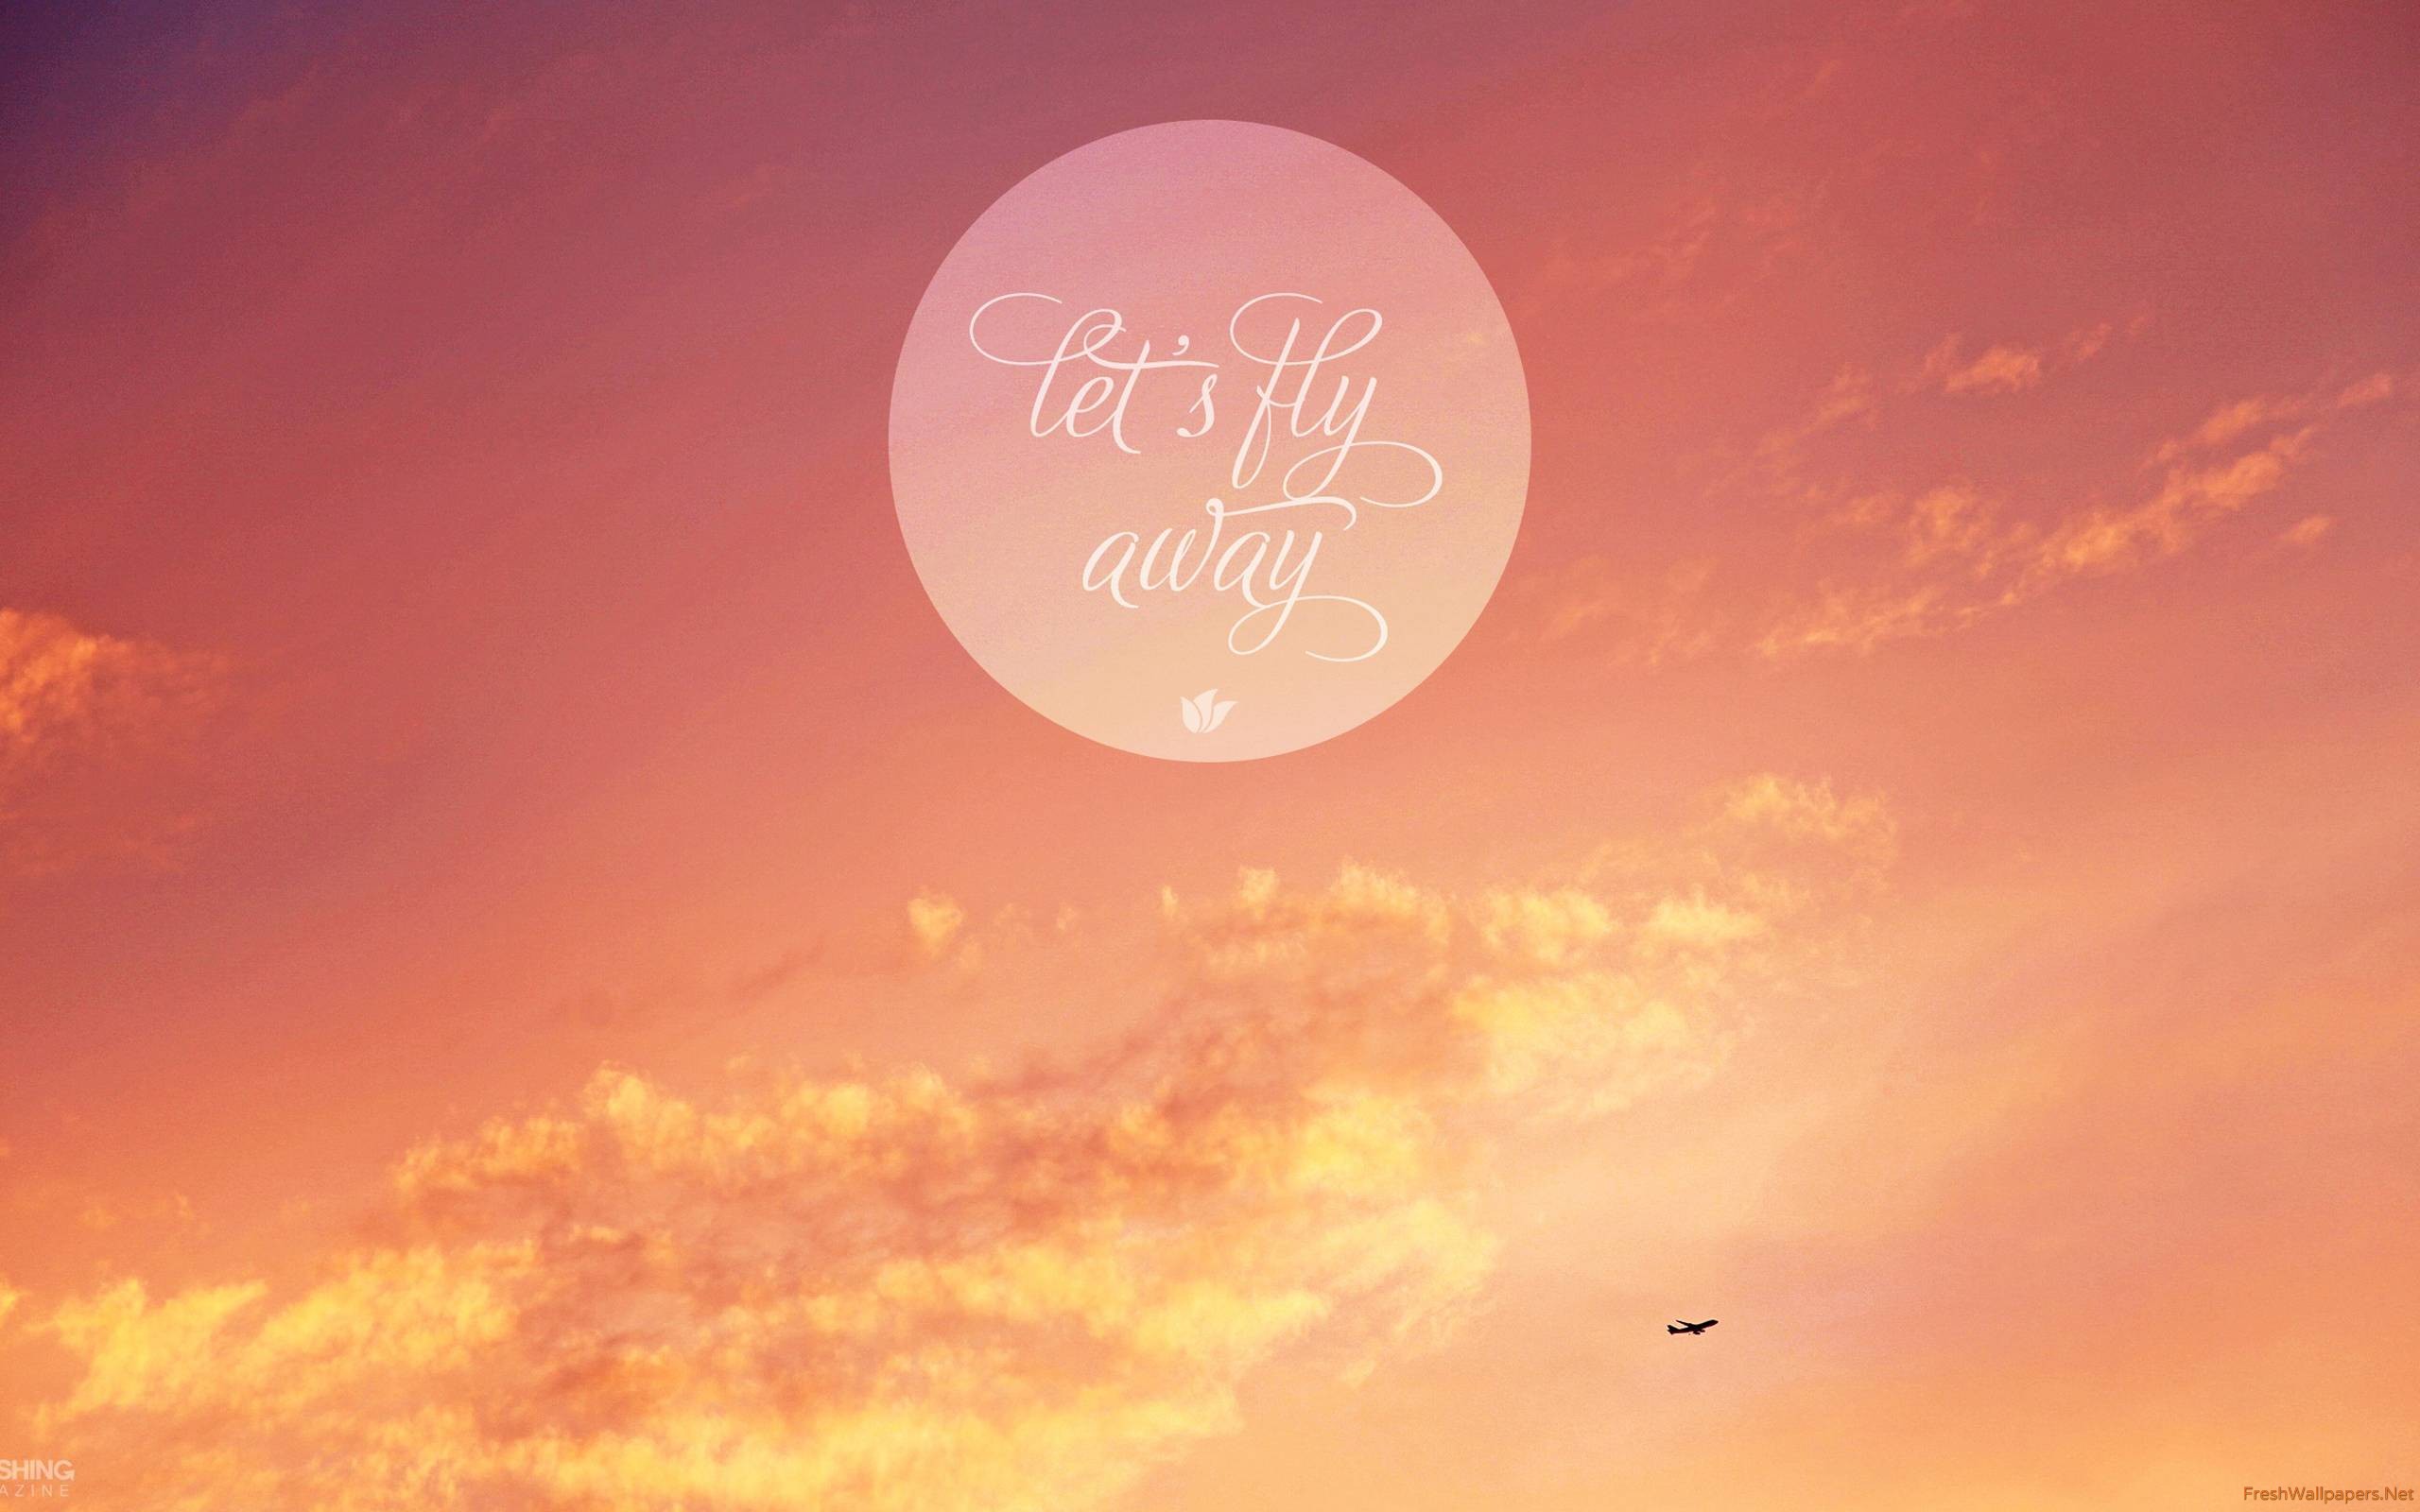 Lets fly away wallpapers | Freshwallpapers